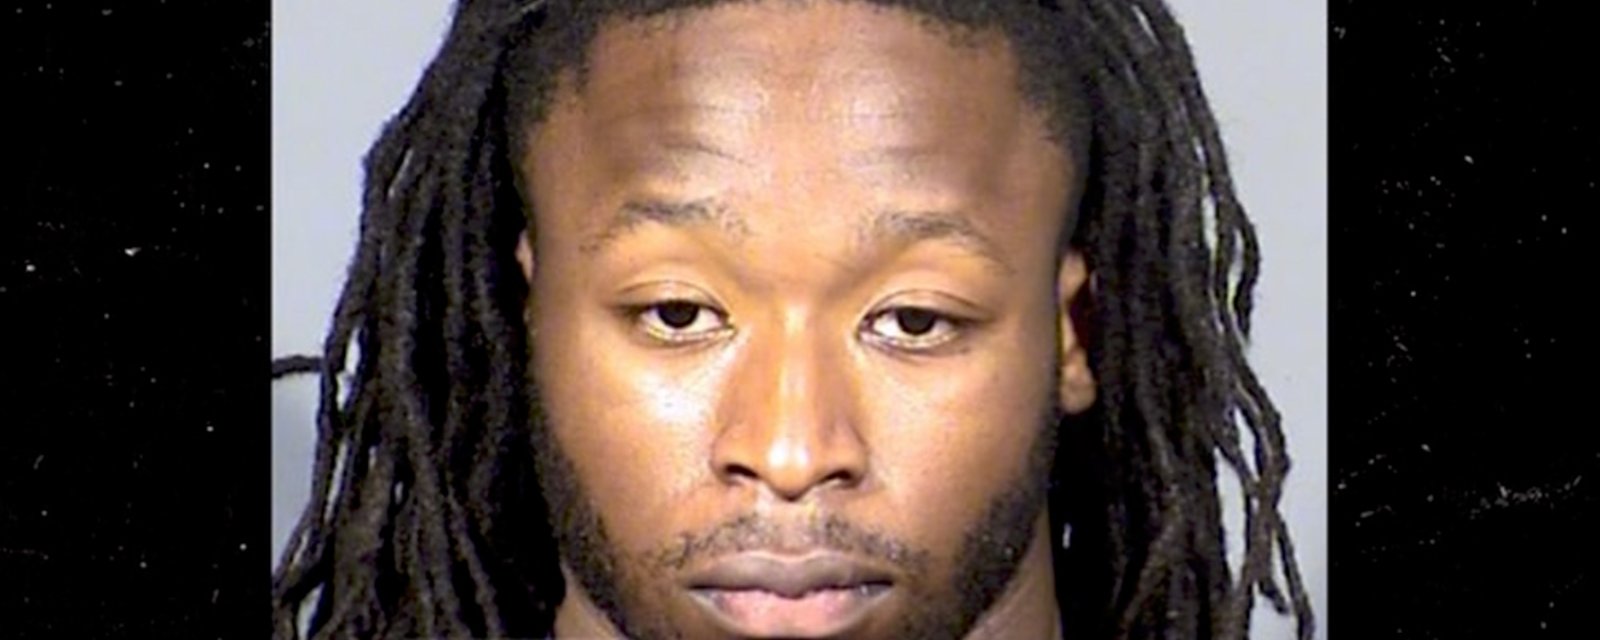 Horrifying photo of injuries suffered by victim of Alvin Kamara released! 